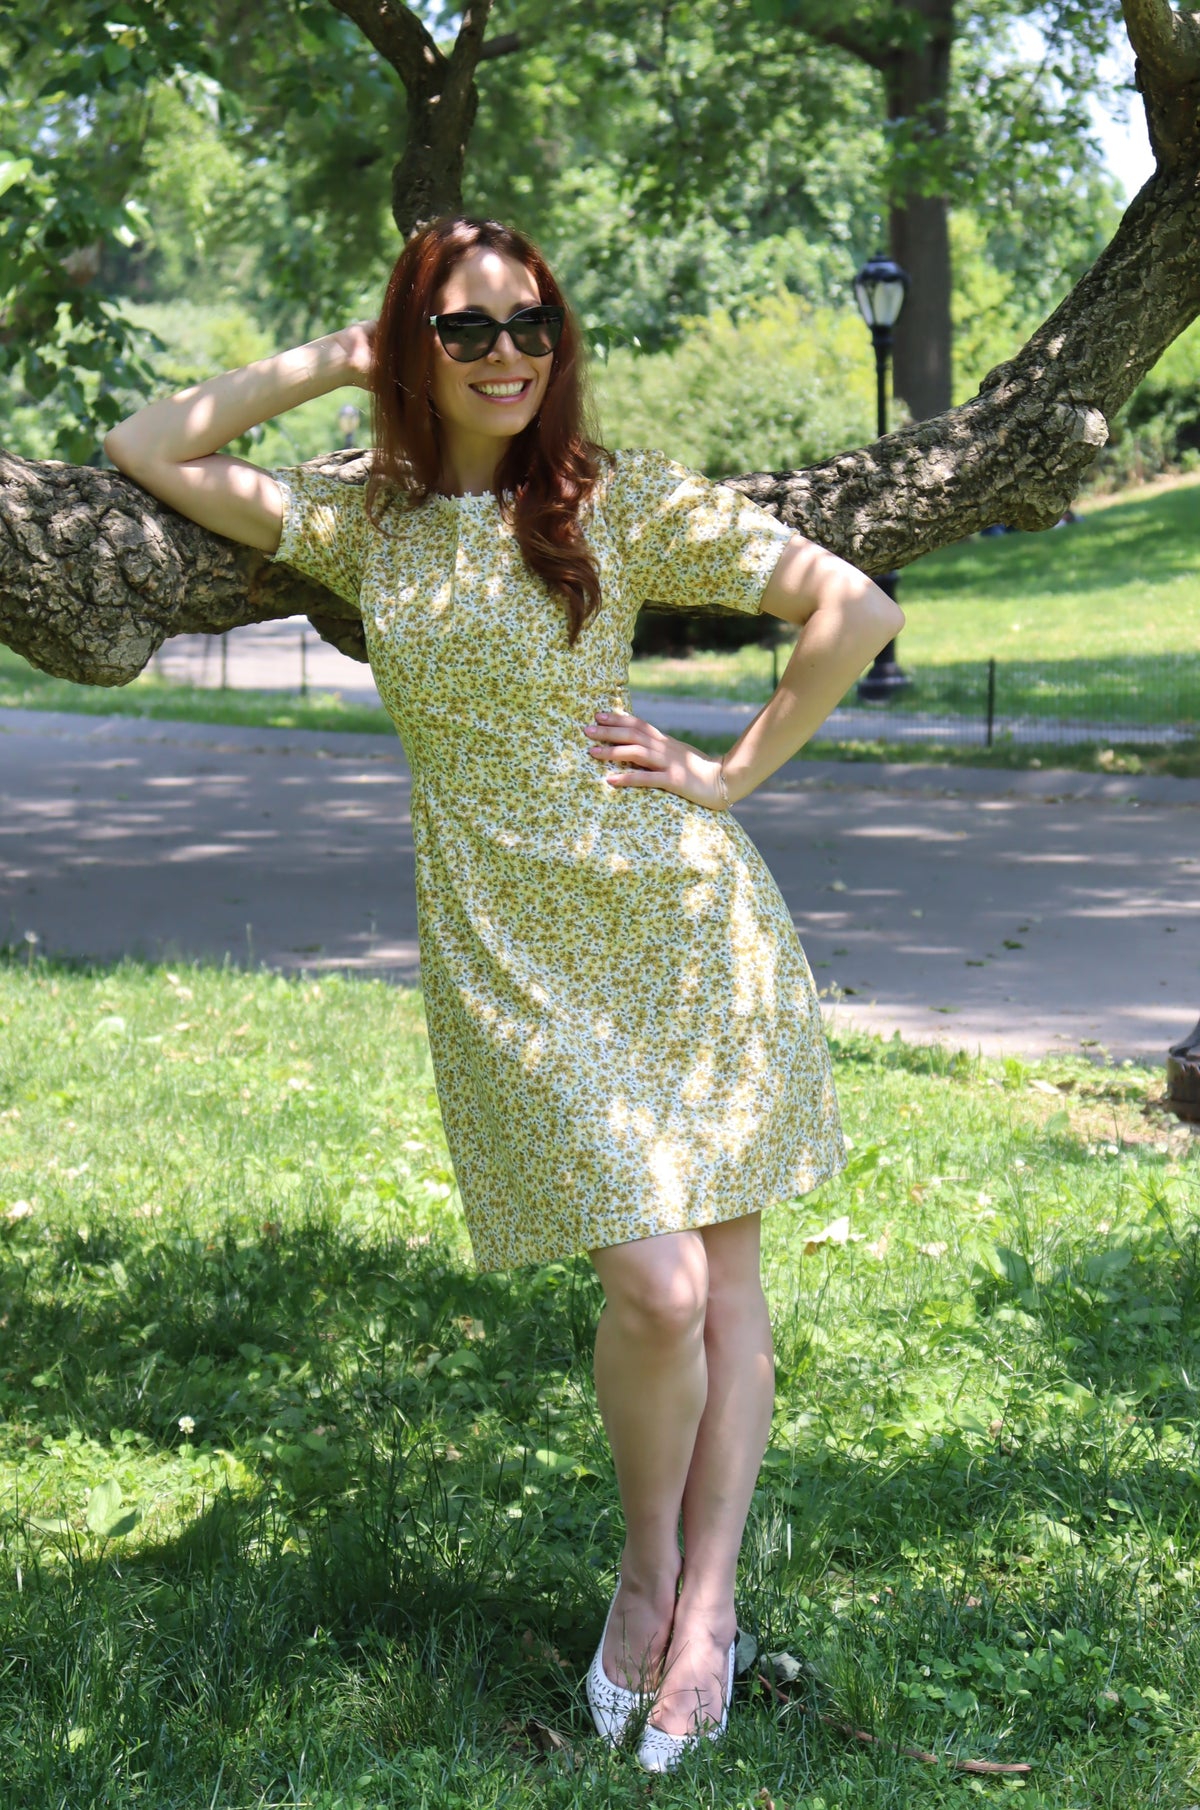 Model in short yellow floral dress with short sleeves and white daisy trim leaning on a tree.